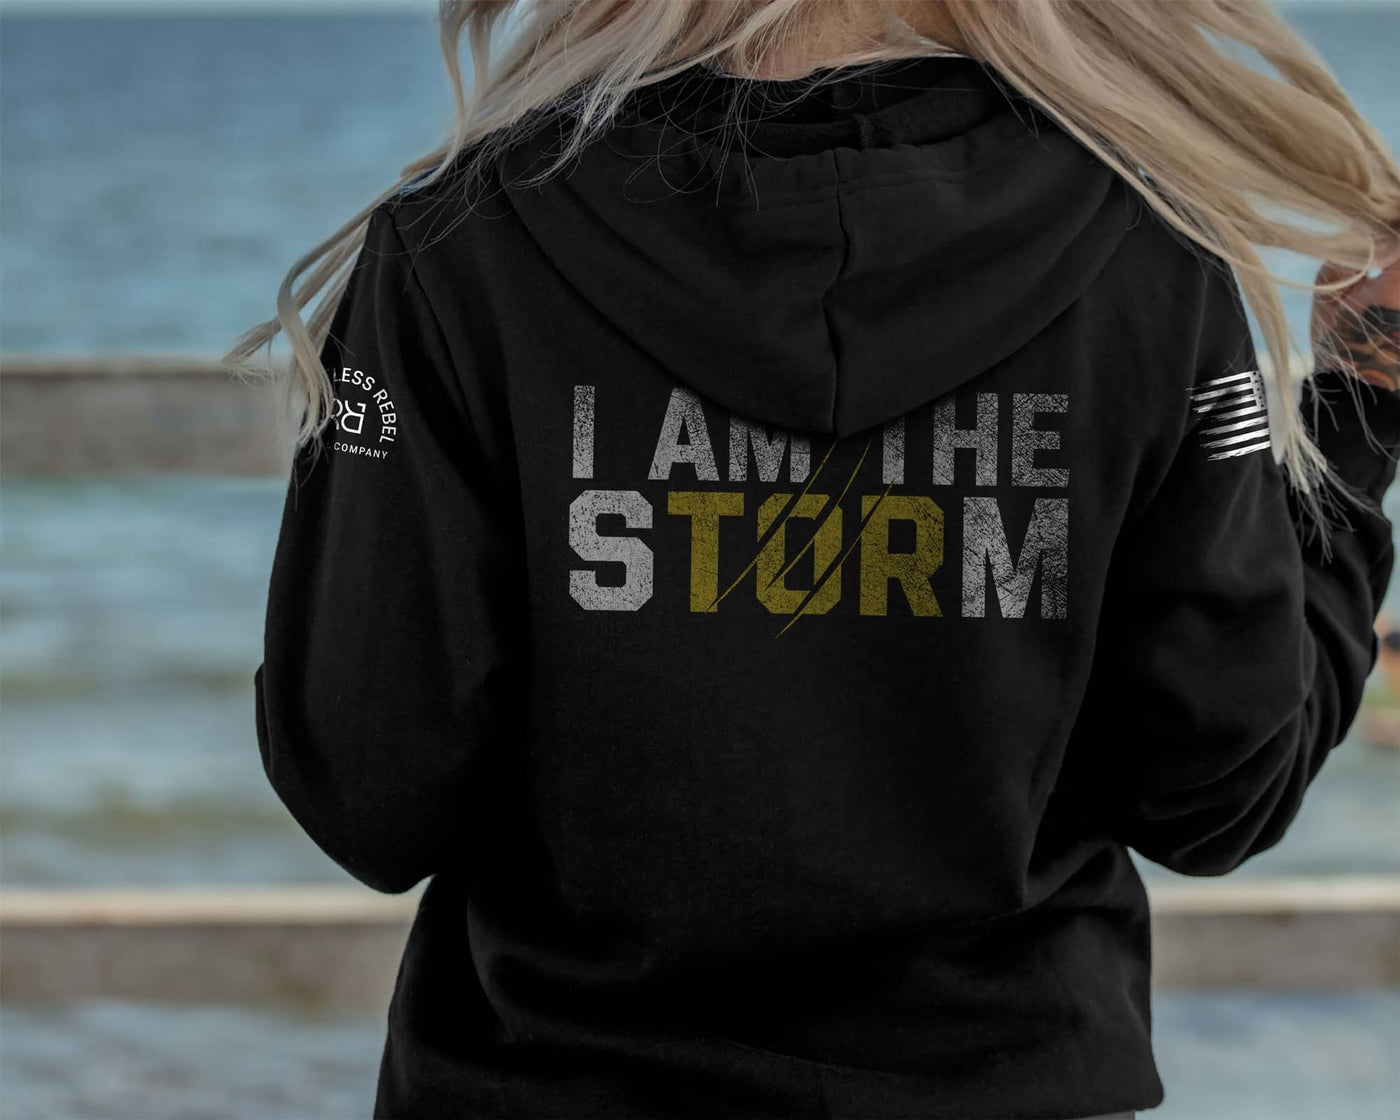 I Am the Storm | White | Women's Hoodie